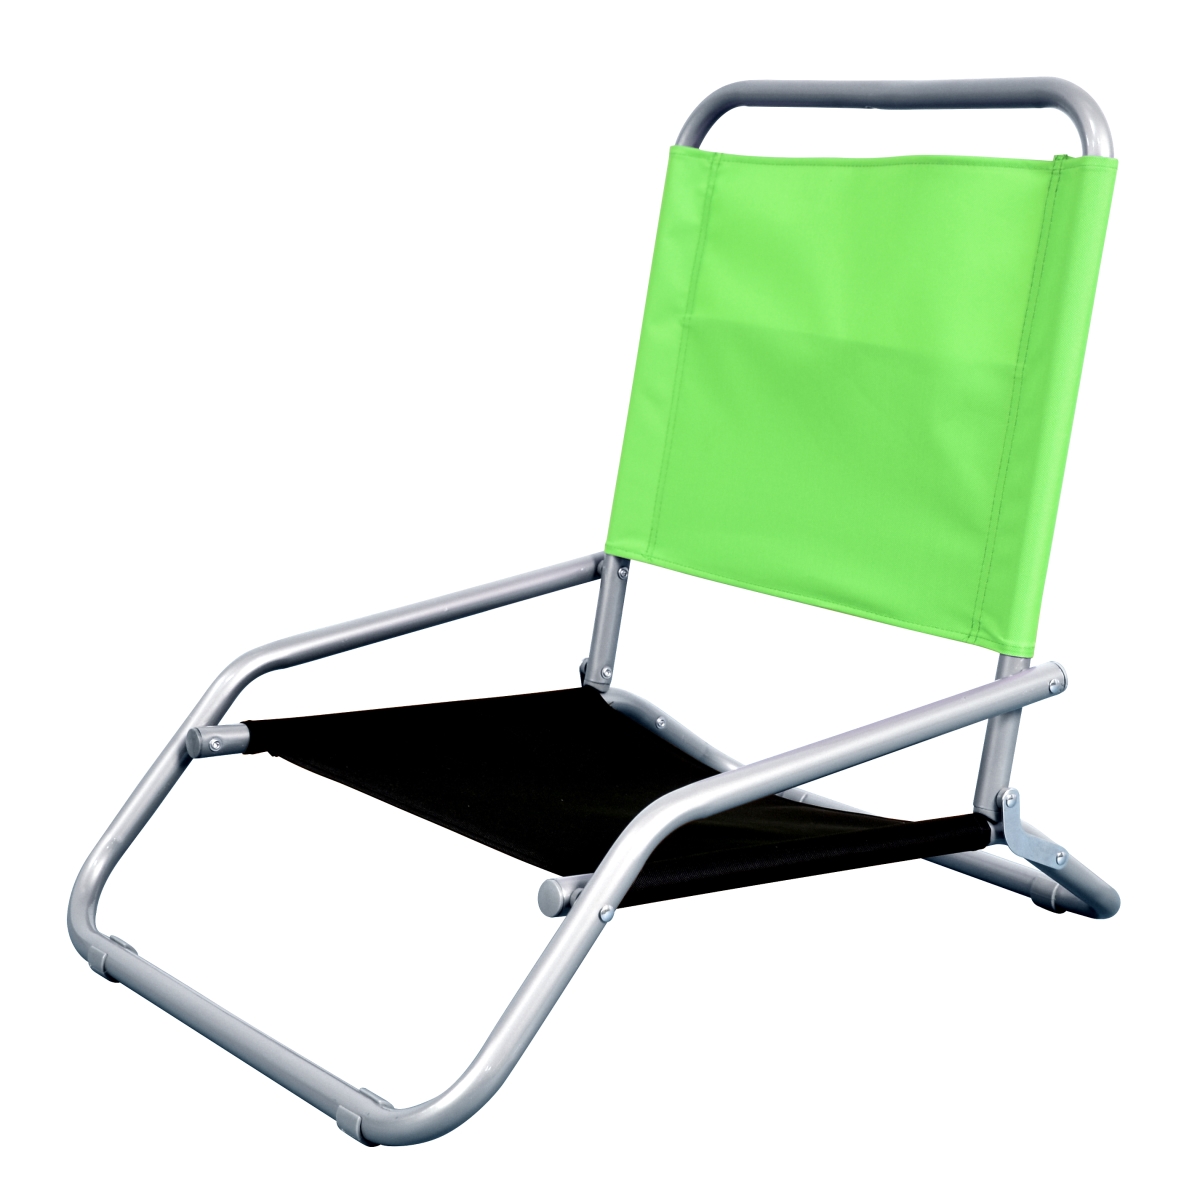 Bc11-p29-p34 Outdoor Silver Steel Frame Low Folding Portable Lightweight Beach Chair In Green & Black, 23.5 X 19 X 26 In.